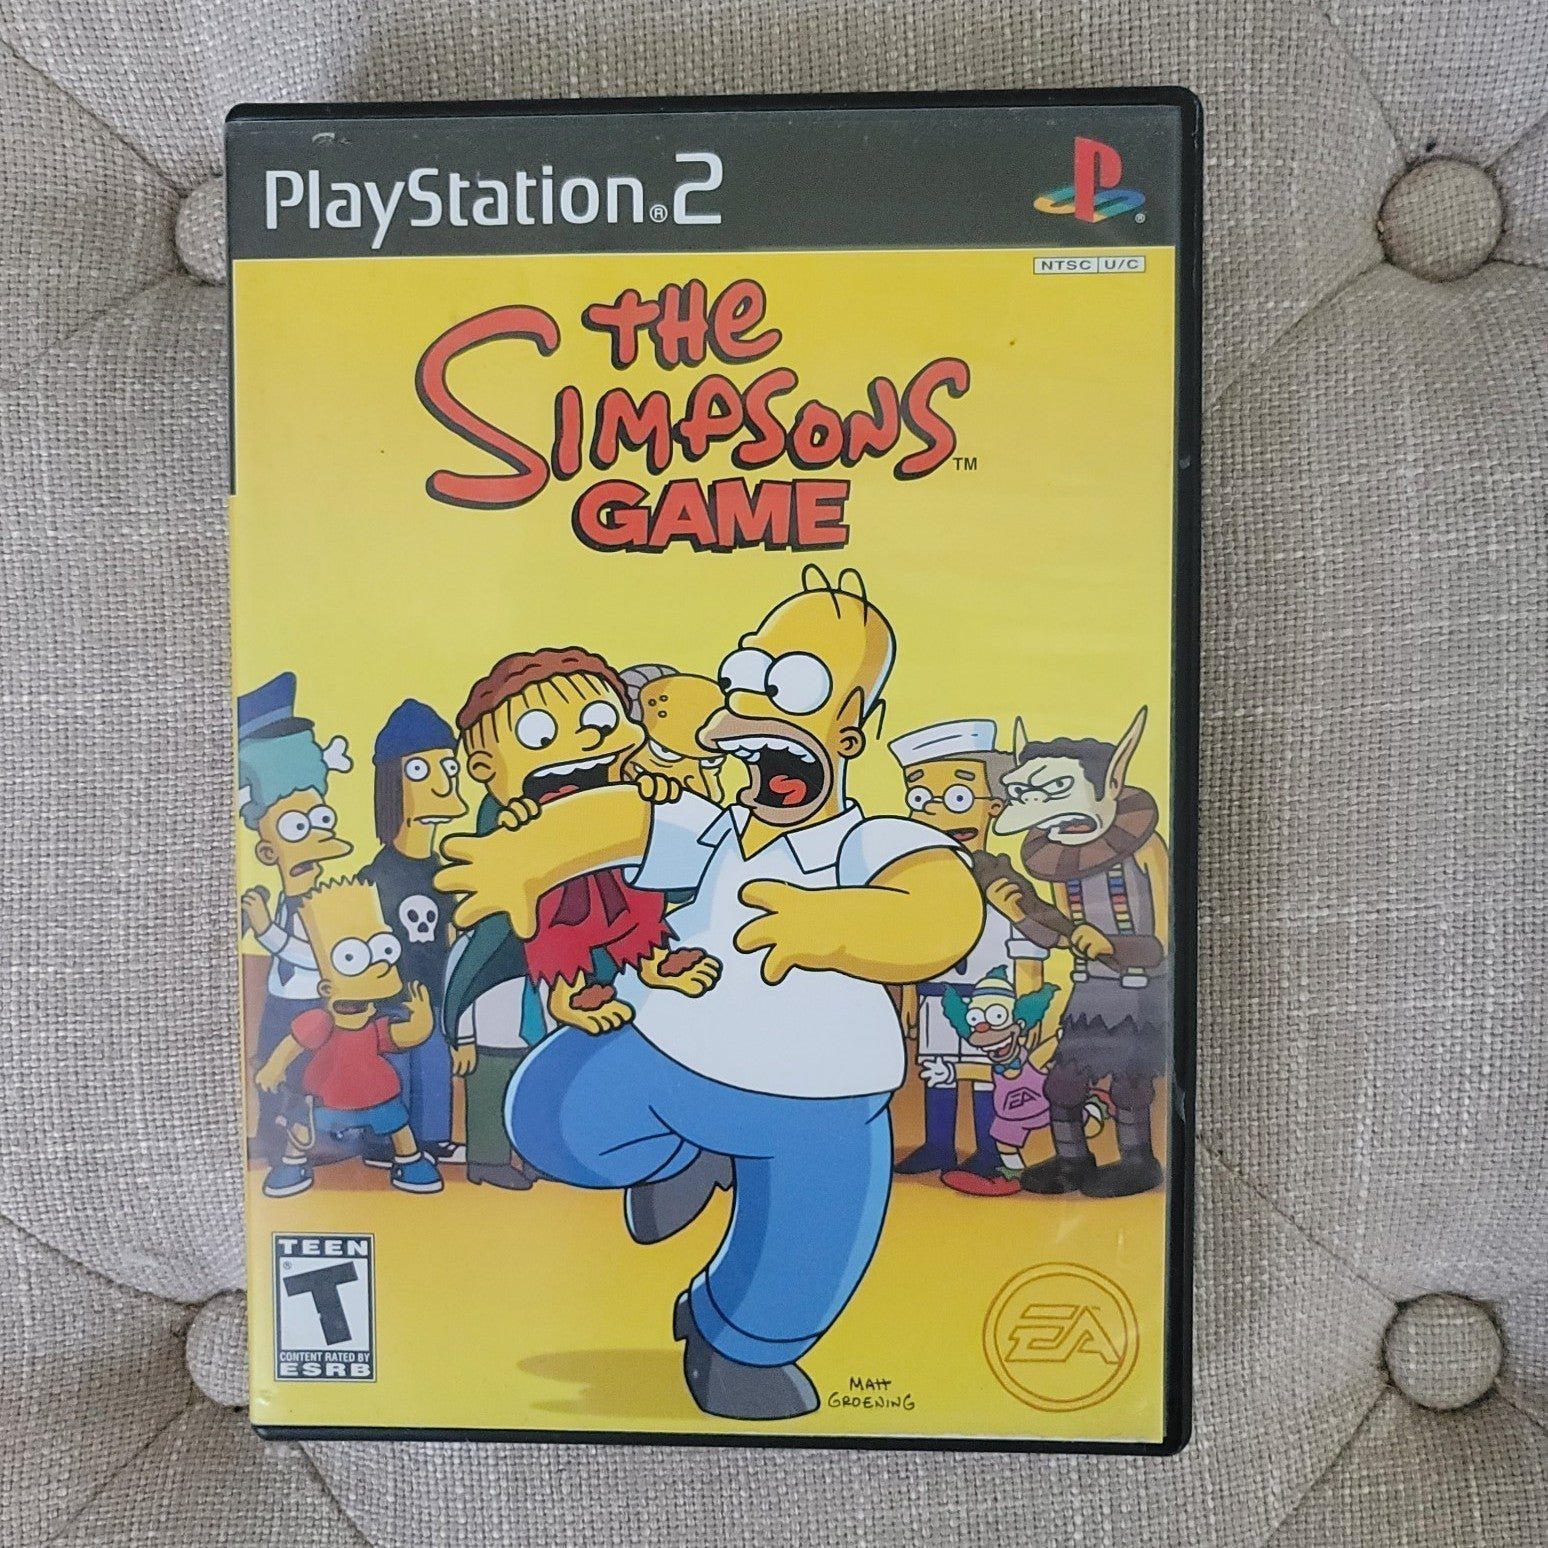 THE SIMPSONS PS2 Game with Original Case Inserts E Everyone PlayStation 2 ep8A93uvf